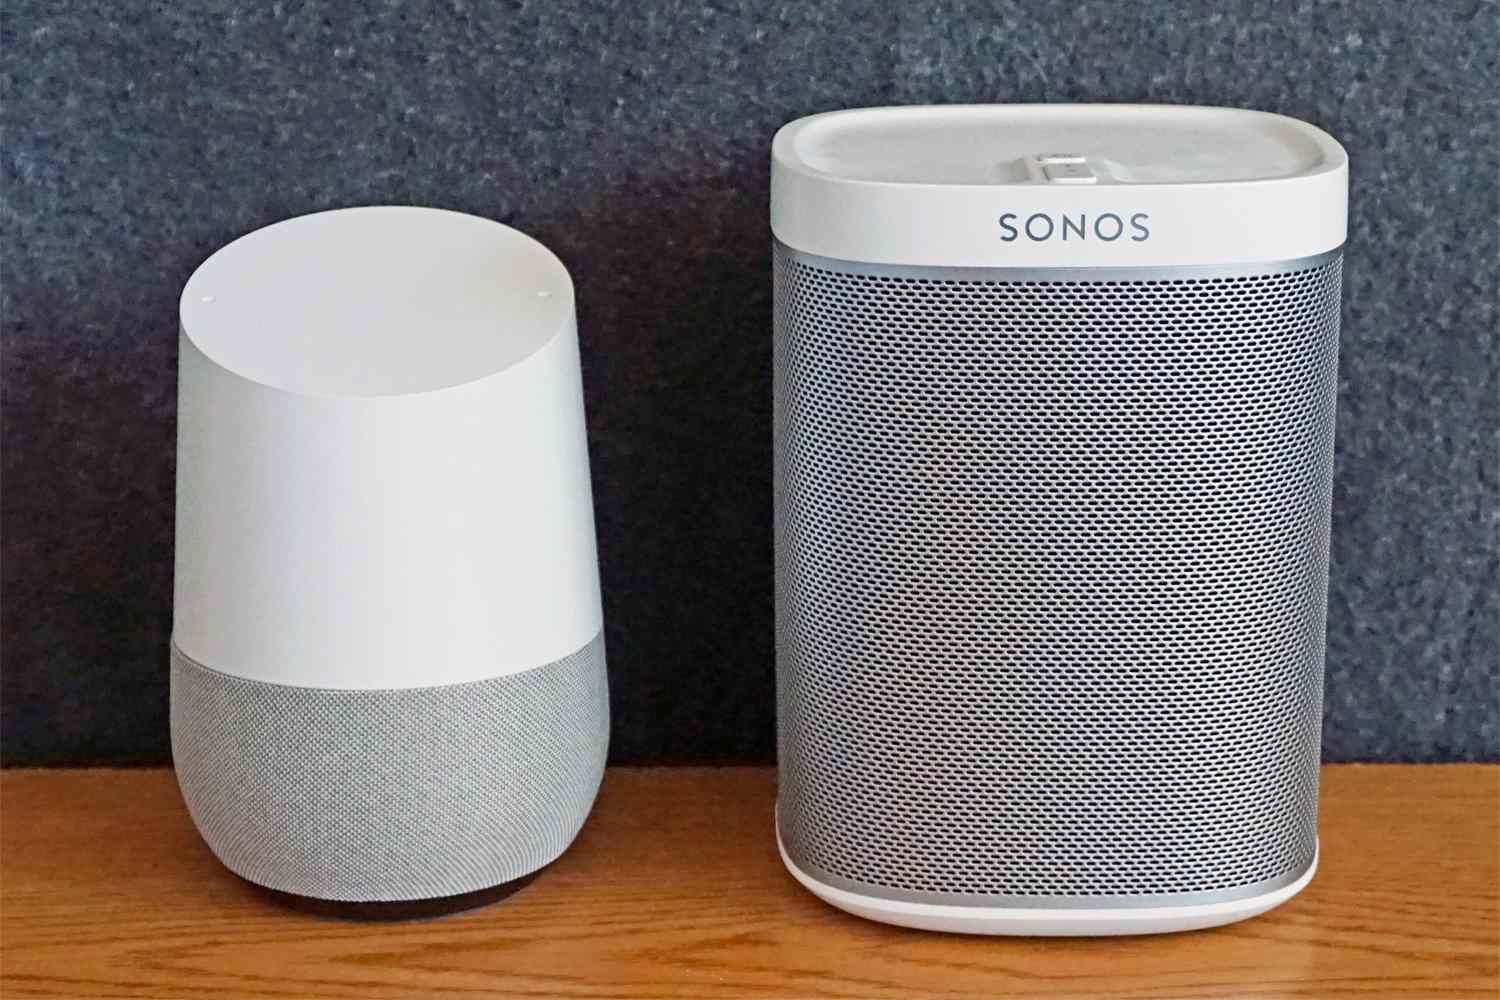 When Will Google Home Work With Sonos